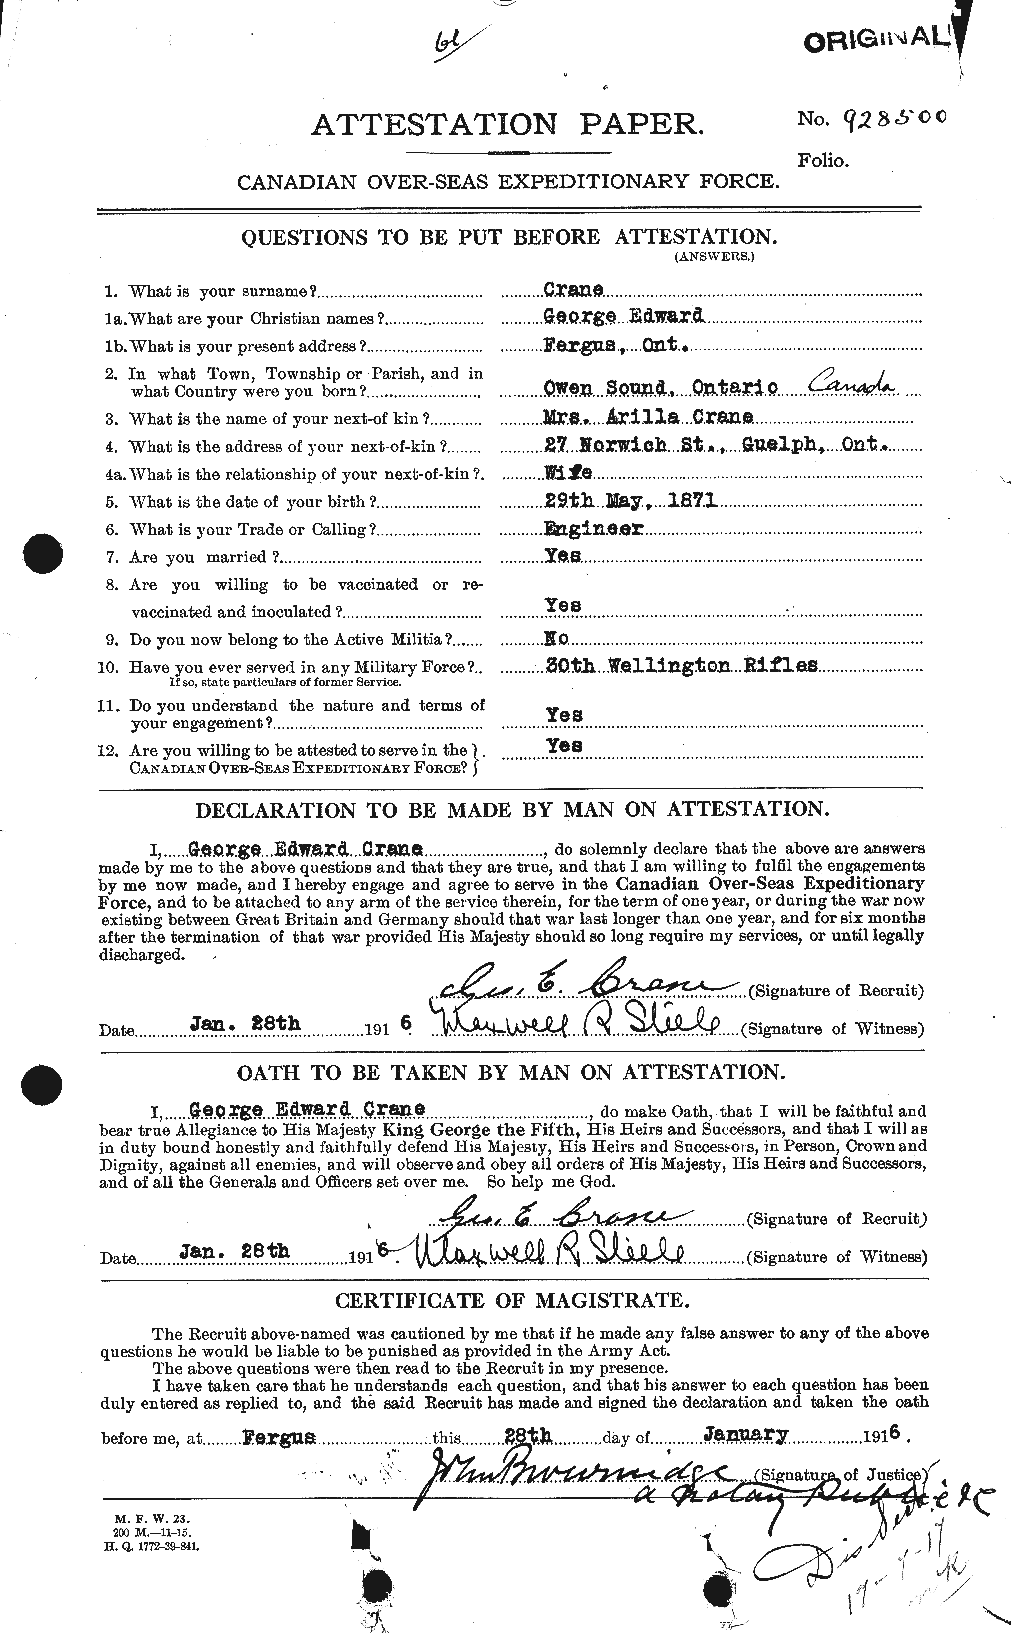 Personnel Records of the First World War - CEF 062006a